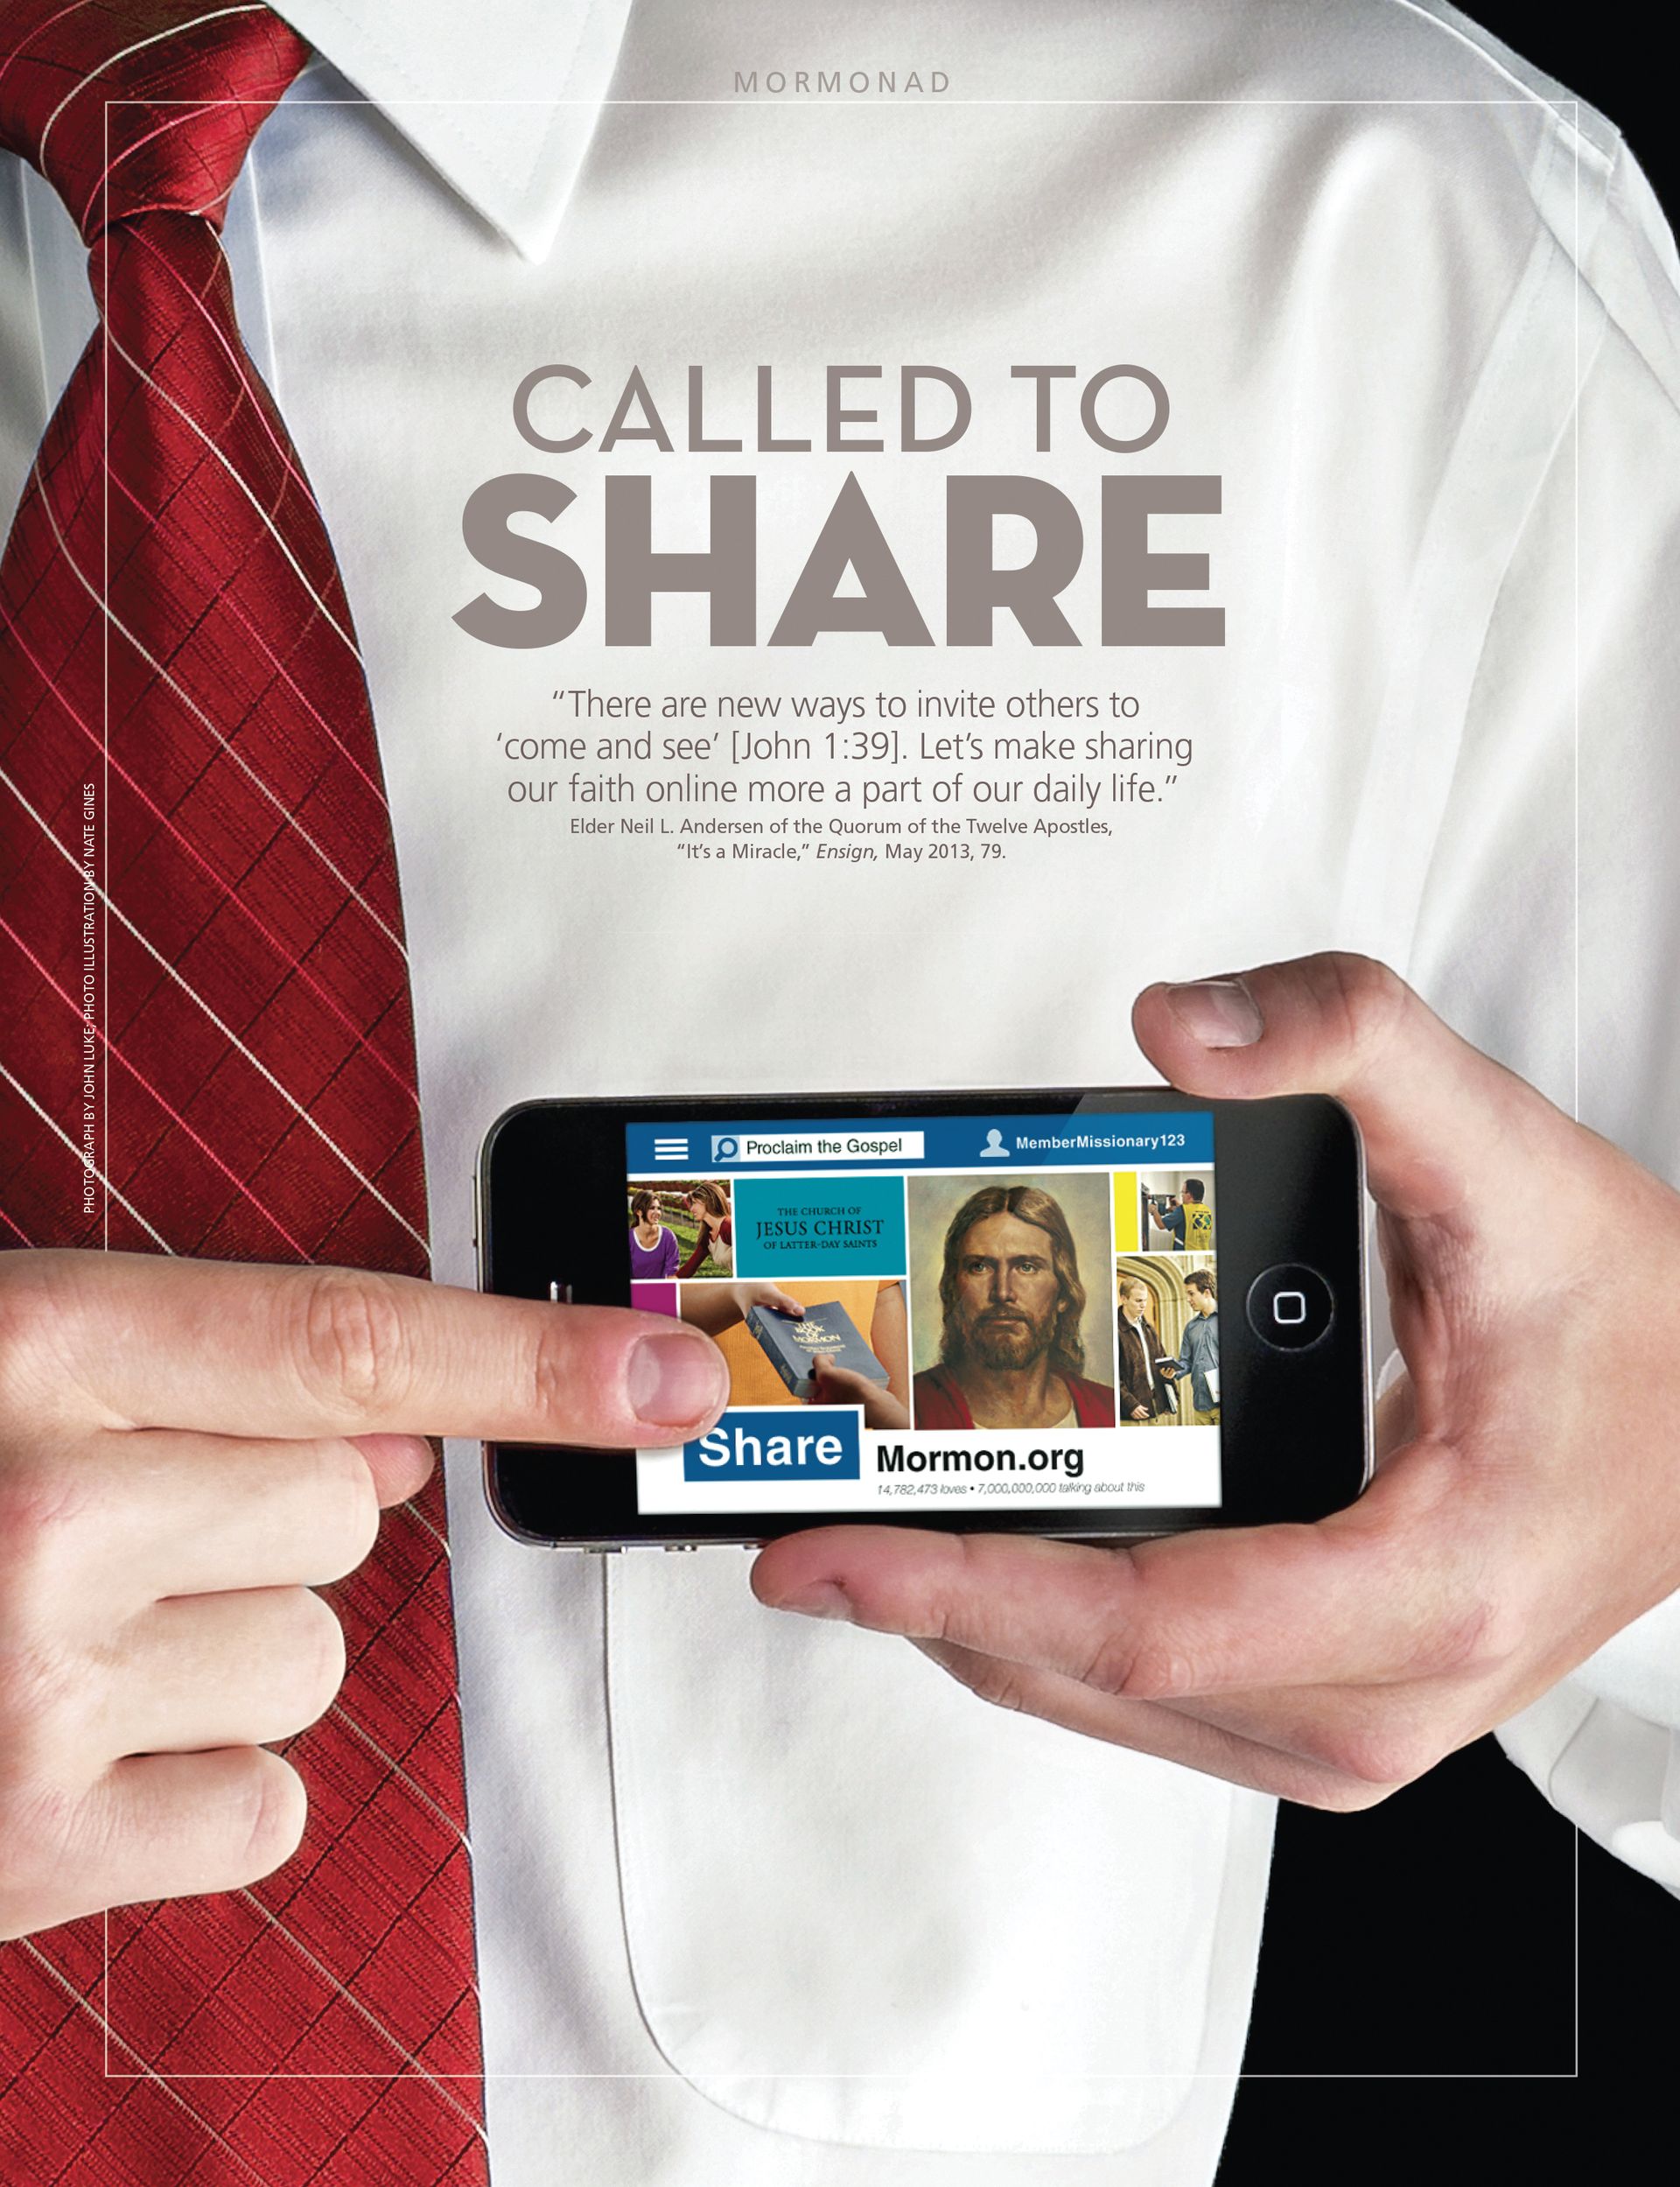 Called To Share. “There are new ways to invite others to ‘come and see’ [John 1:39]. Let’s make sharing our faith online more a part of our daily life.” Elder Neil L. Andersen of the Quorum of the Twelve Apostles, “It’s a Miracle,” Ensign, May 2013, 79. Nov. 2013